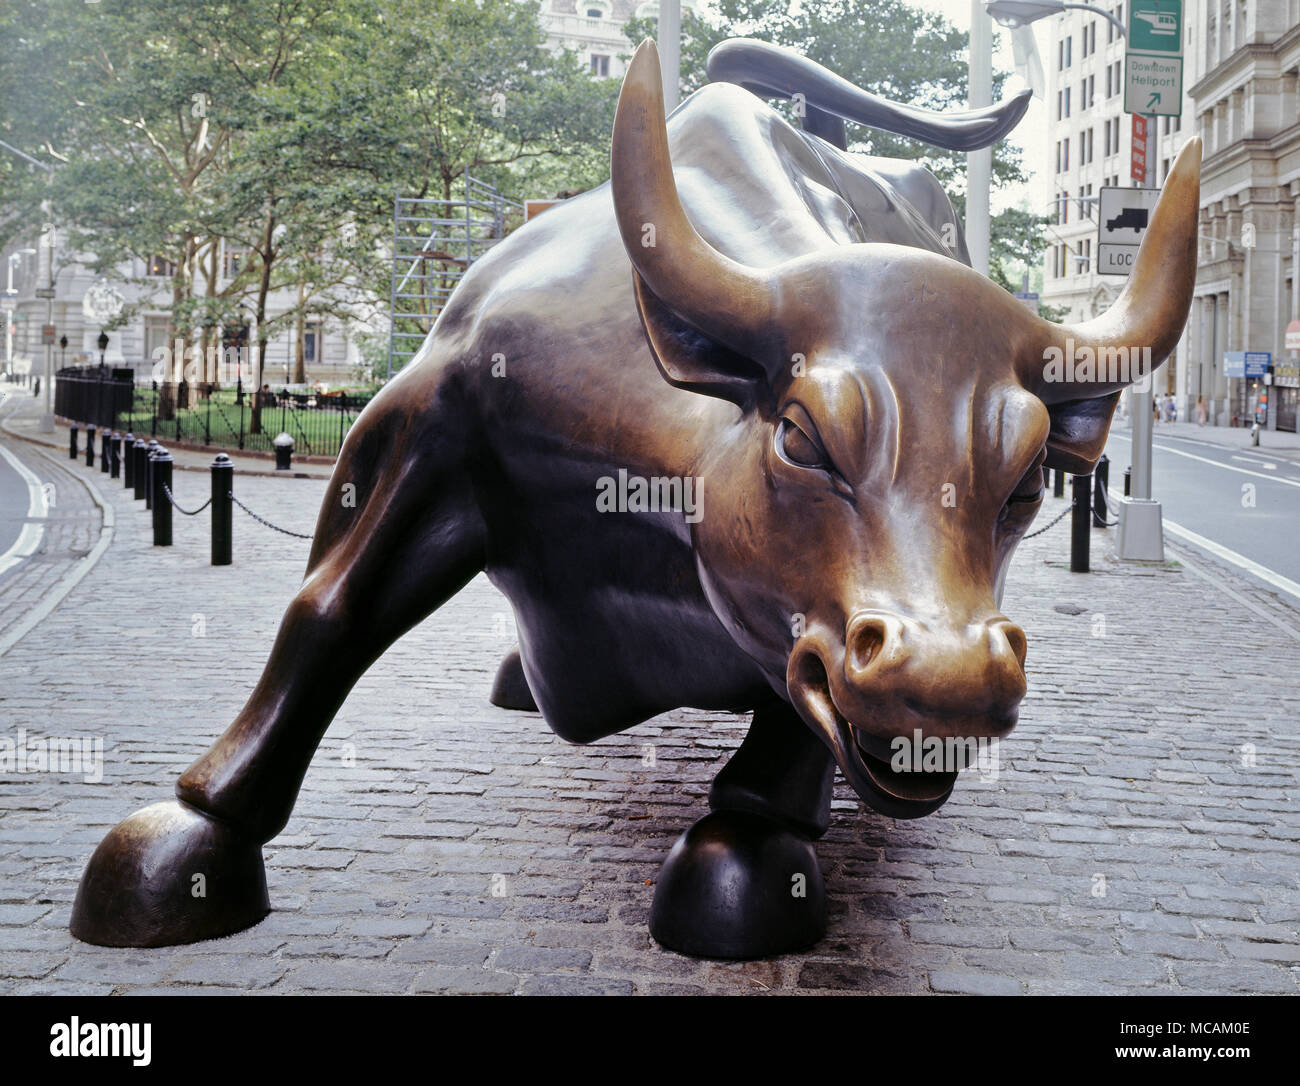 Charging Bull, which is sometimes referred to as the Wall Street Bull or the Bowling Green Bull, is a 3,200-kilogram (7,100?lb) bronze sculpture by Arturo Di Modica that stands in Bowling Green Park near Wall Street in Manhattan, New York City. Standing 11 feet (3.4?m) tall and measuring 16 feet (4.9?m) long. the oversize sculpture depicts a bull, the symbol of aggressive financial optimism and prosperity, leaning back on its haunches and with its head lowered as if ready to charge. The sculpture is both a popular tourist destination which draws thousands of people a day, as well as one of the Stock Photo